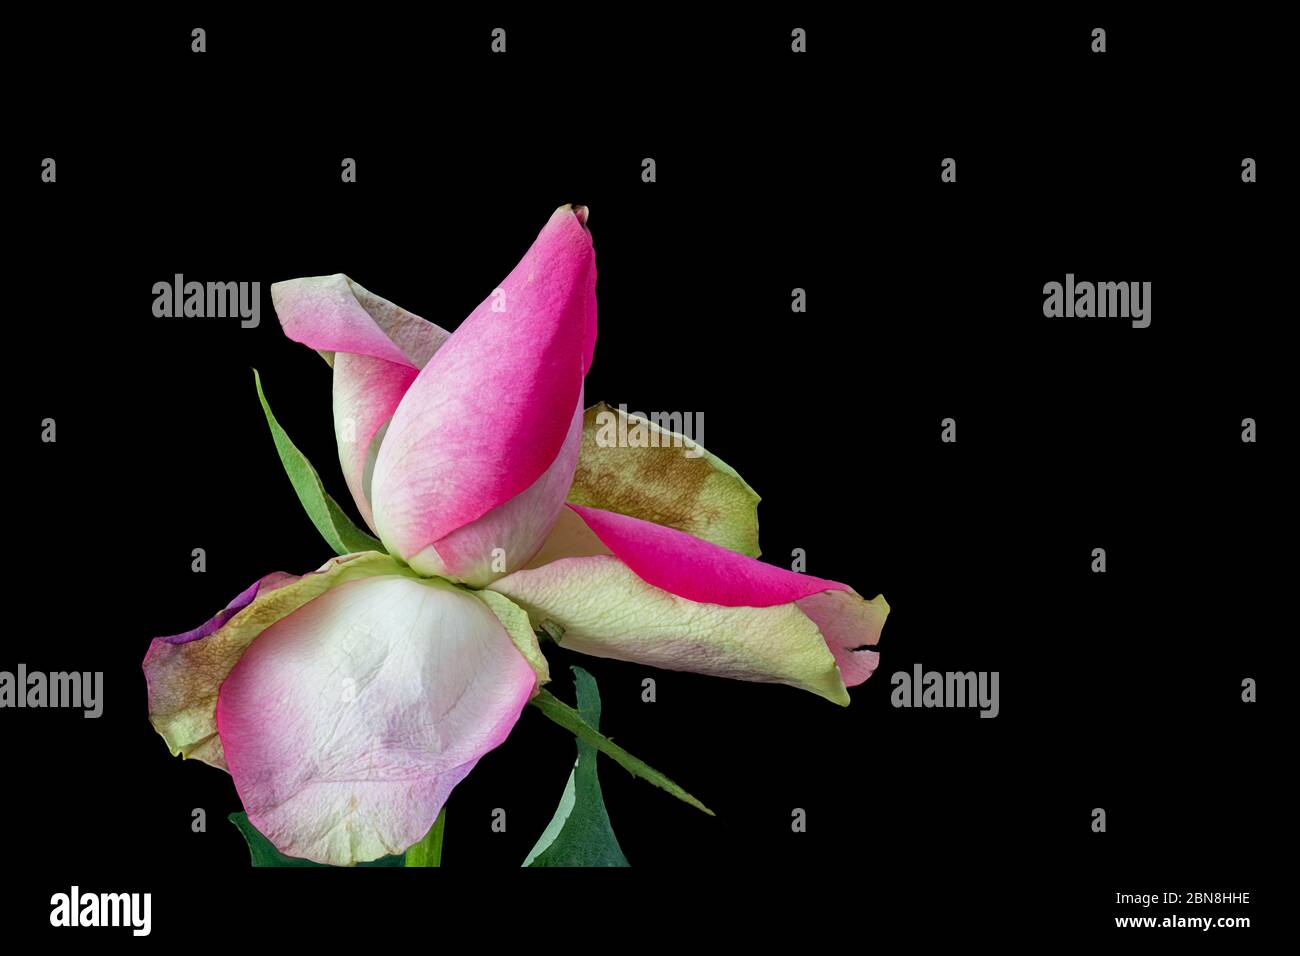 bright pink white aged rose blossom heart macro on black background, single isolated bloom, detailed texture Stock Photo